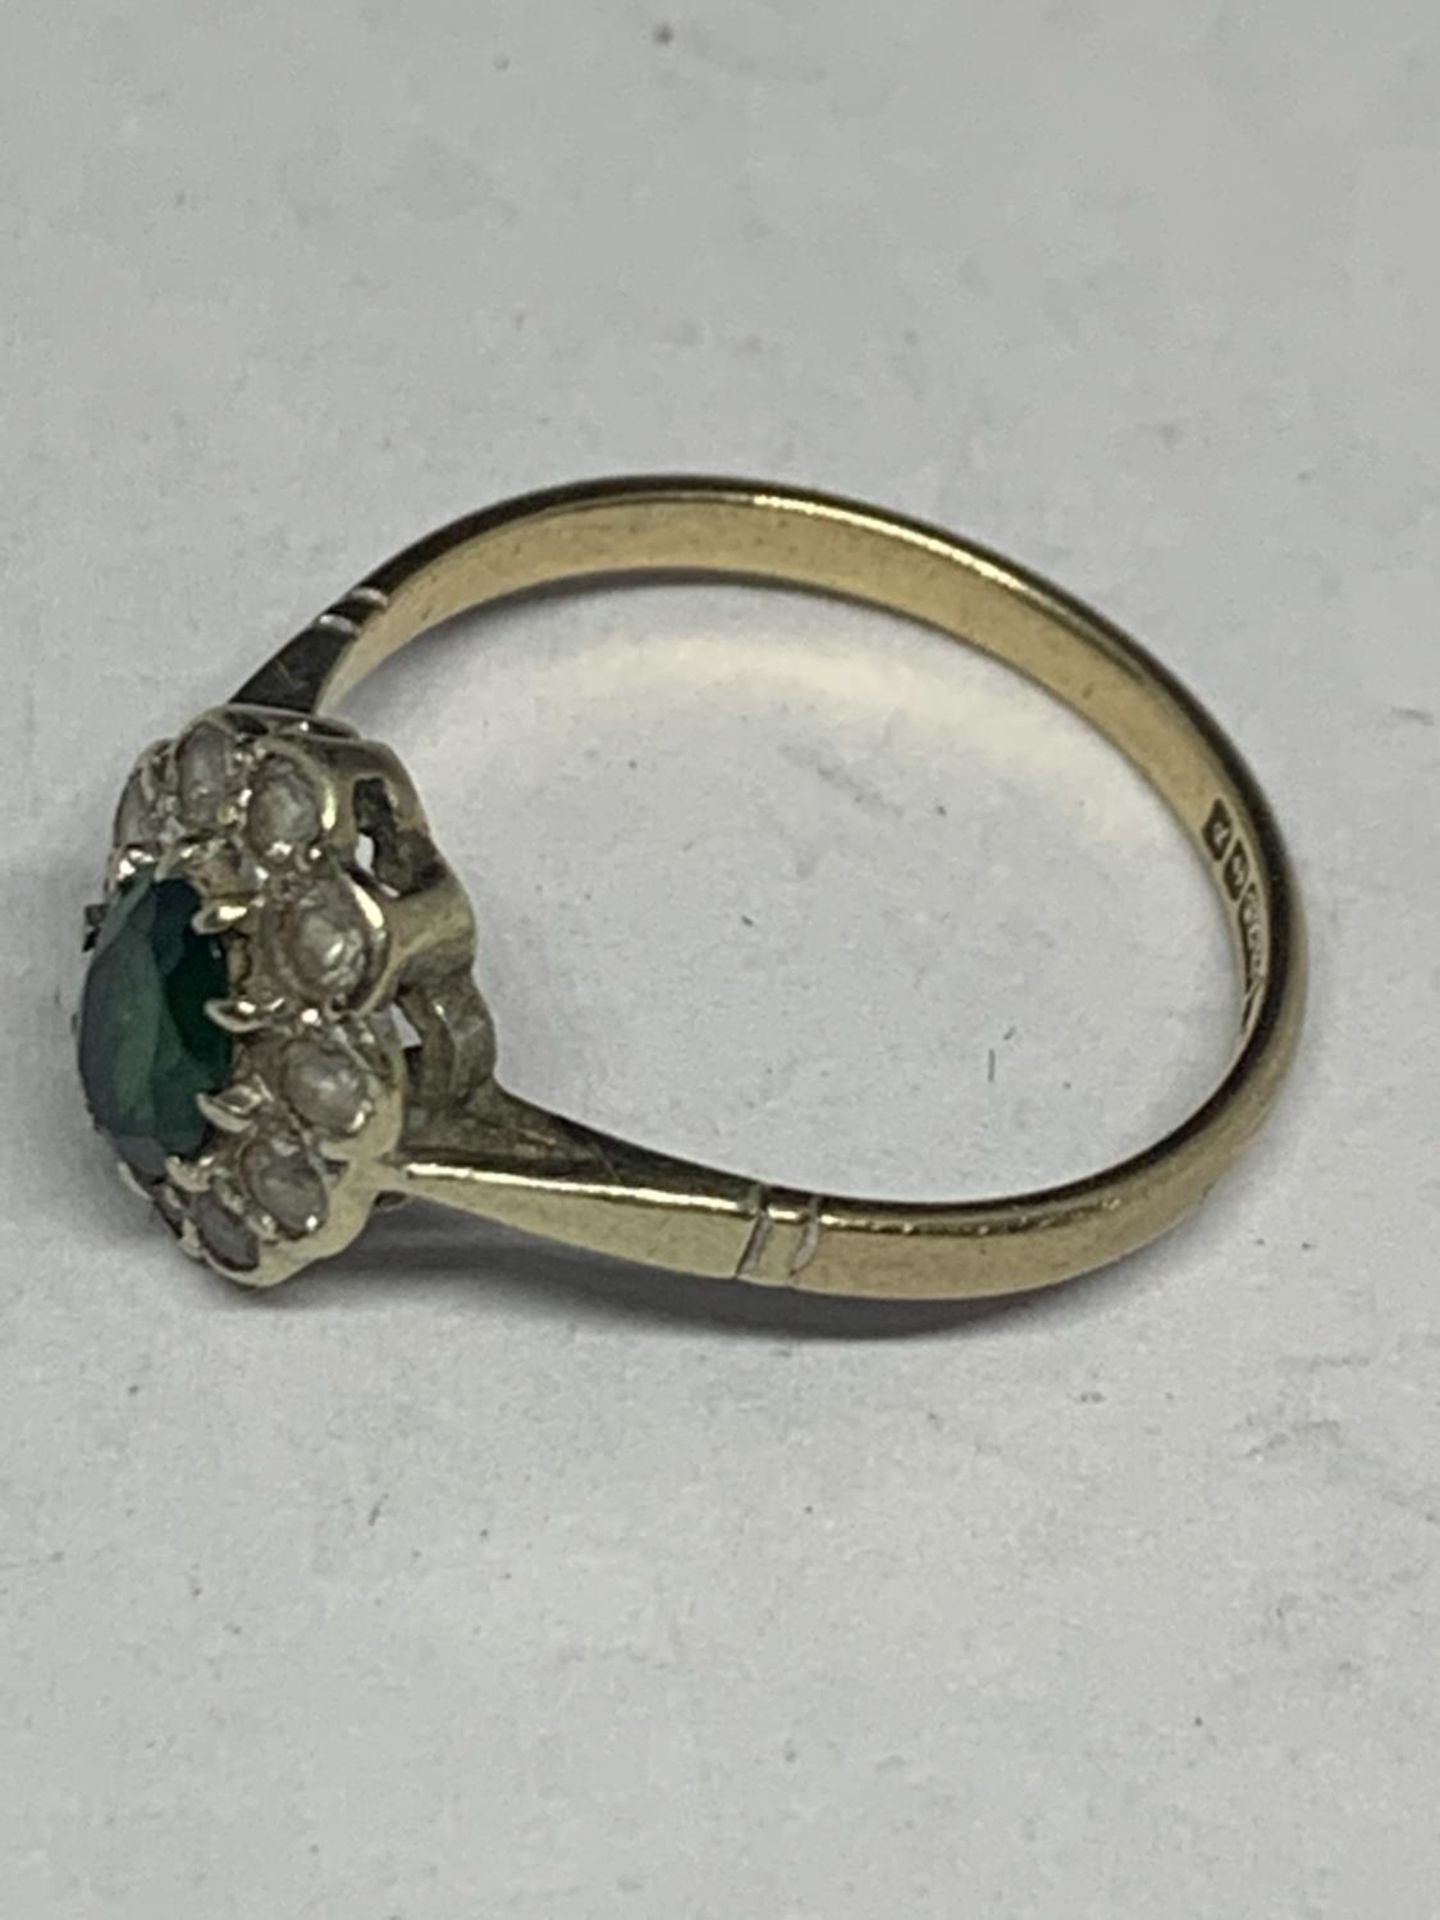 A 9 CARAT GOLD RING WITH A GREEN CENTRE STONE AND CLEAR STONE SURROUNDS SIZE M/N - Image 2 of 3